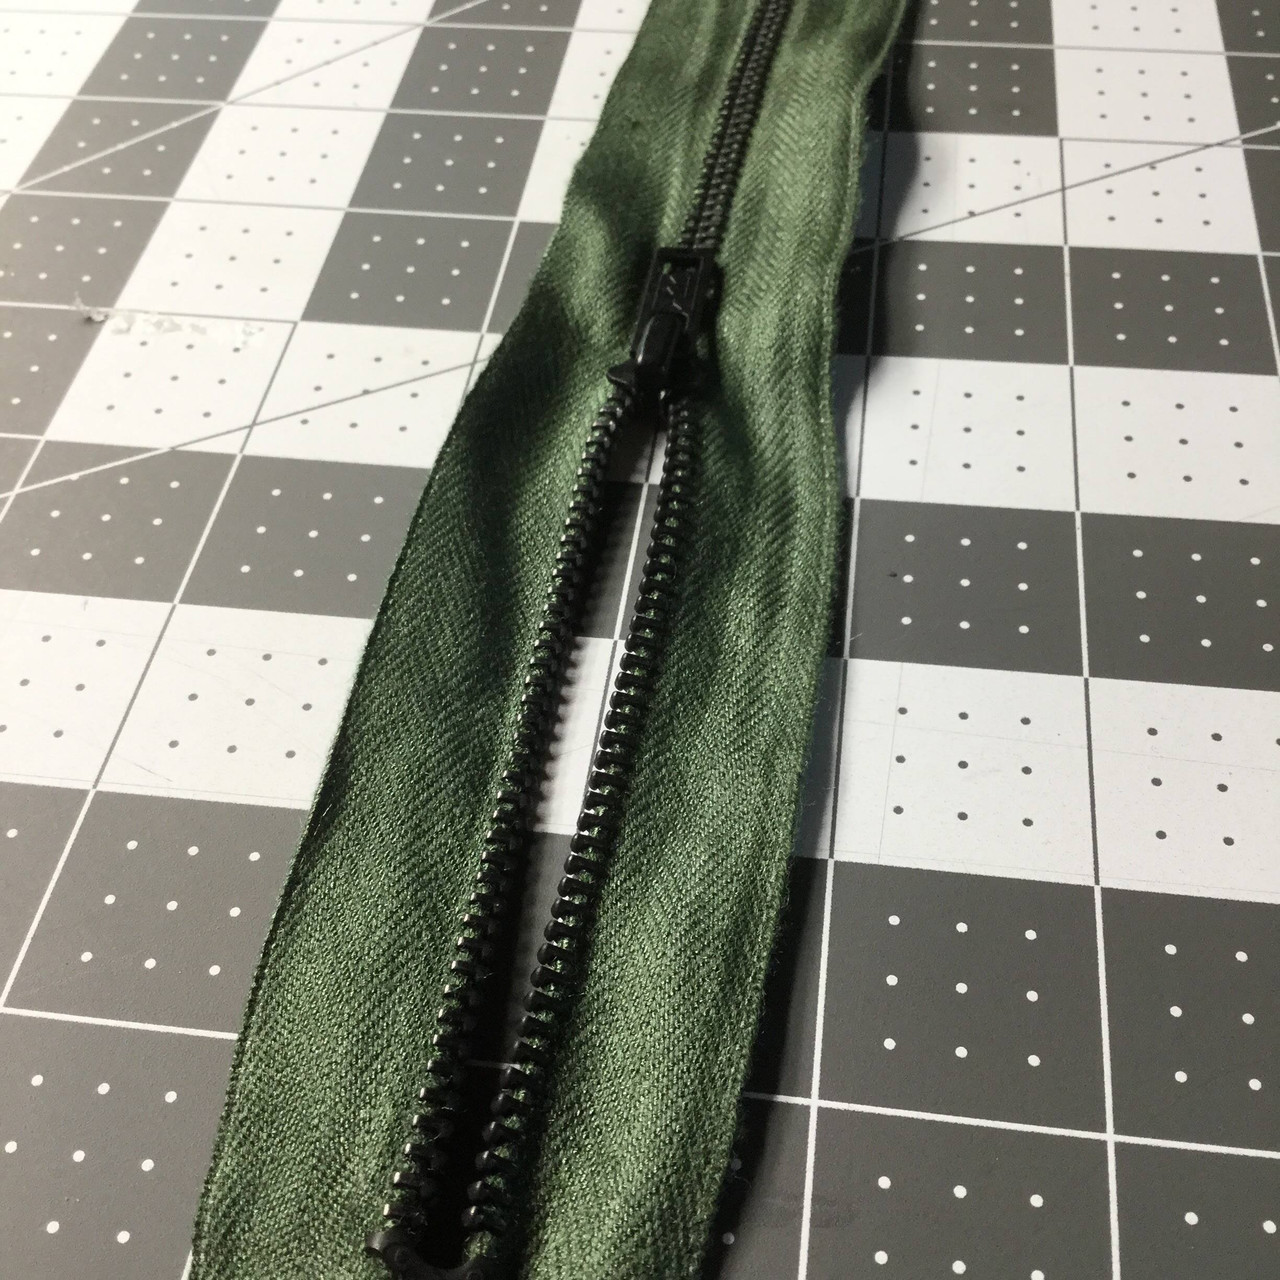  Invisible Zipper Black Zipper 9 inch Zippers for Sewing  Invisible Black Zipper 9” DIY Zippers Supplies for Tailor Sewing Crafts